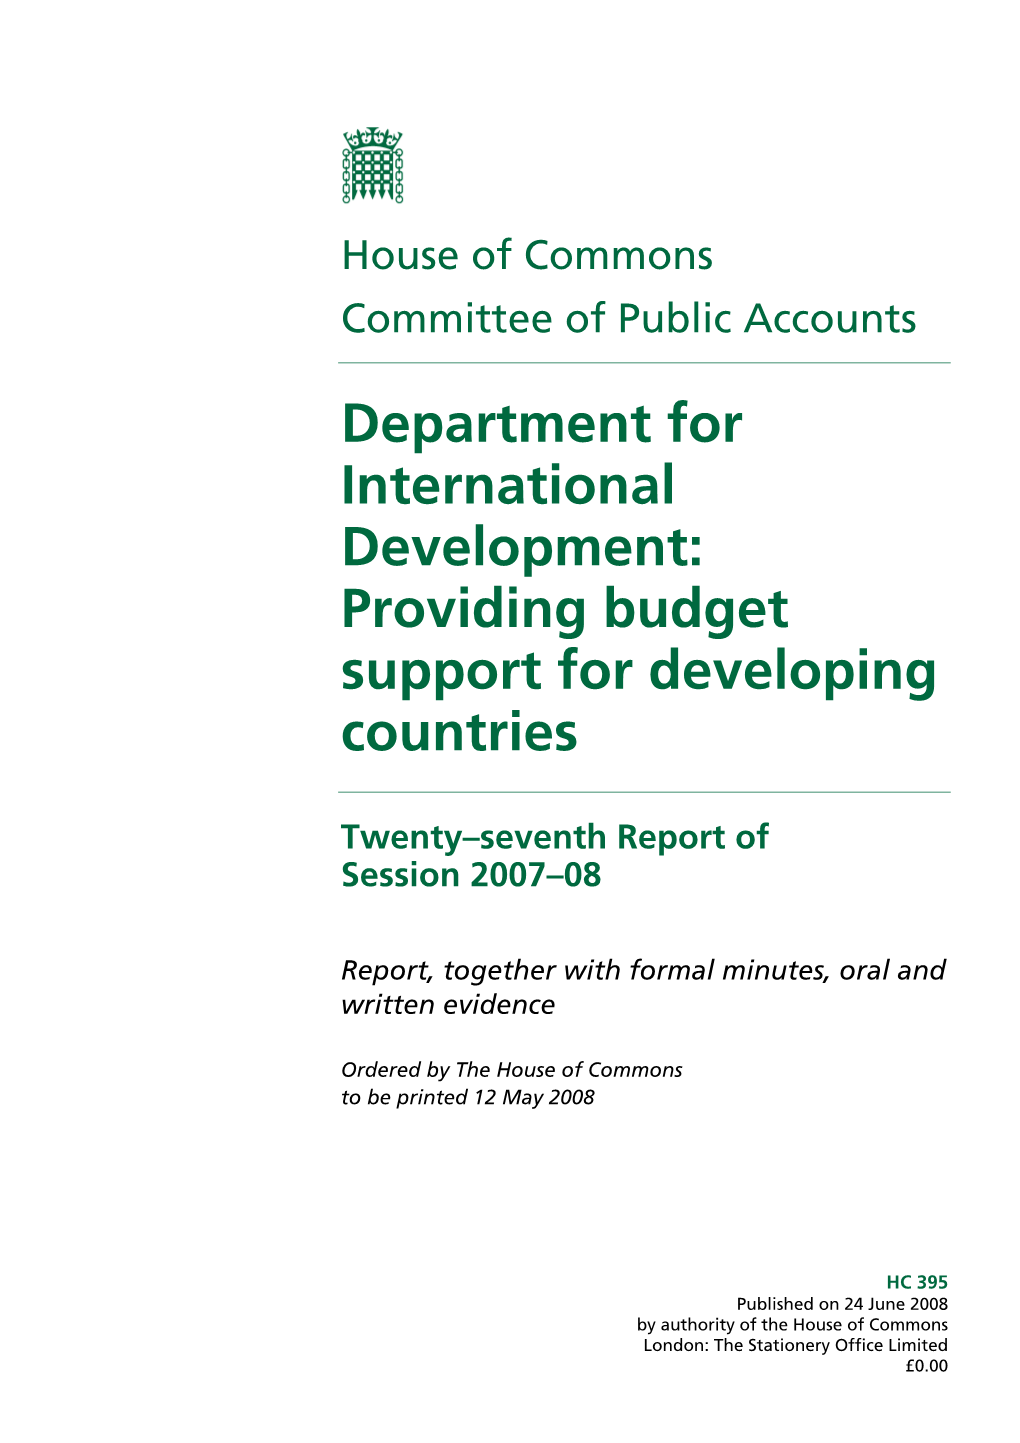 Providing Budget Support for Developing Countries